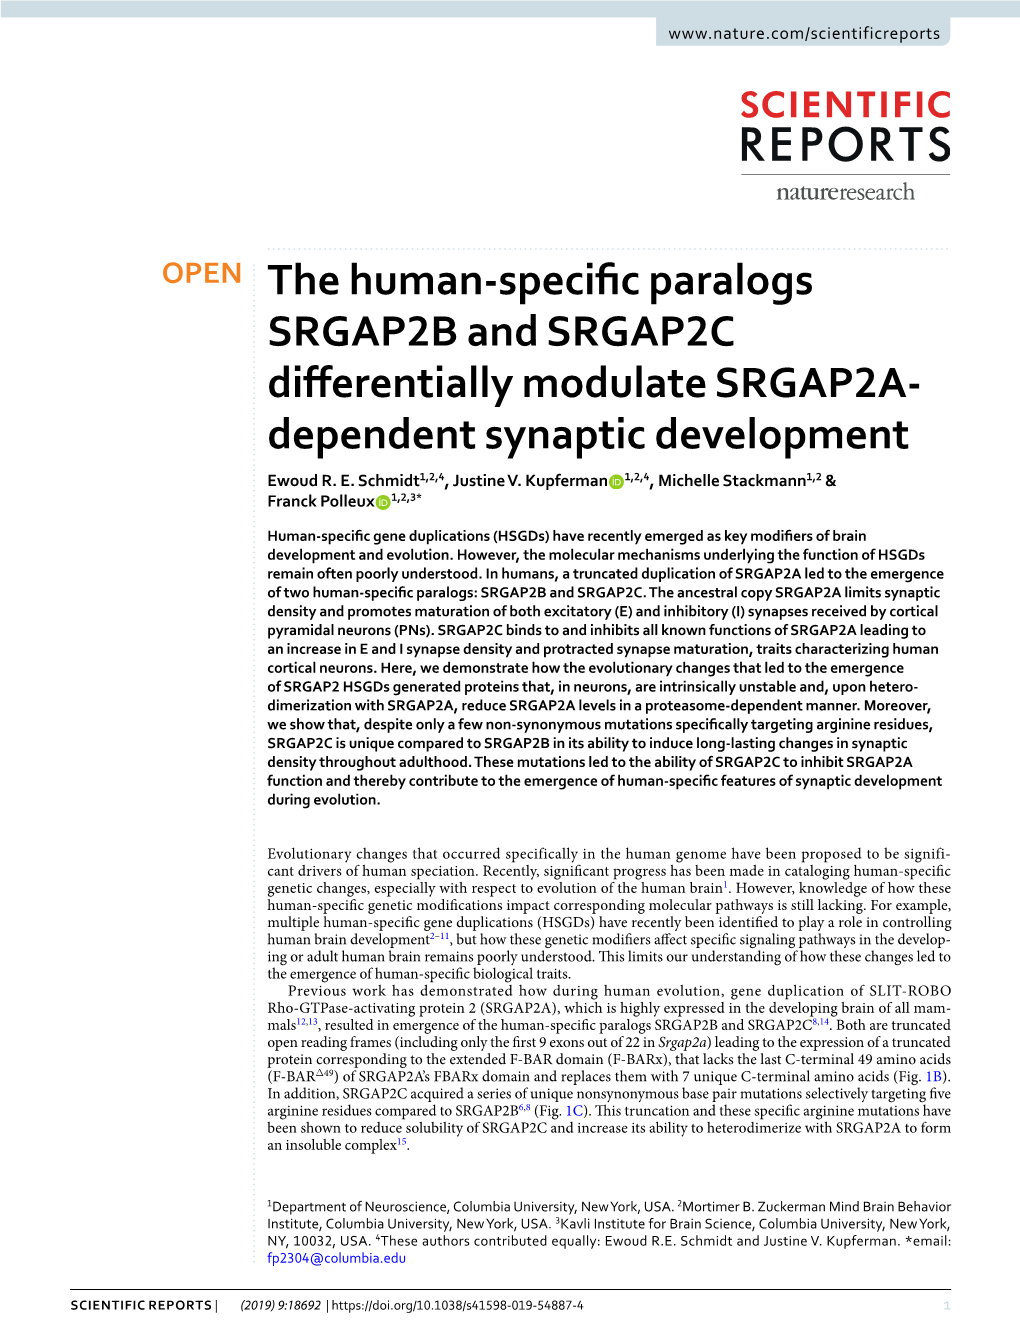 The Human-Specific Paralogs SRGAP2B and SRGAP2C